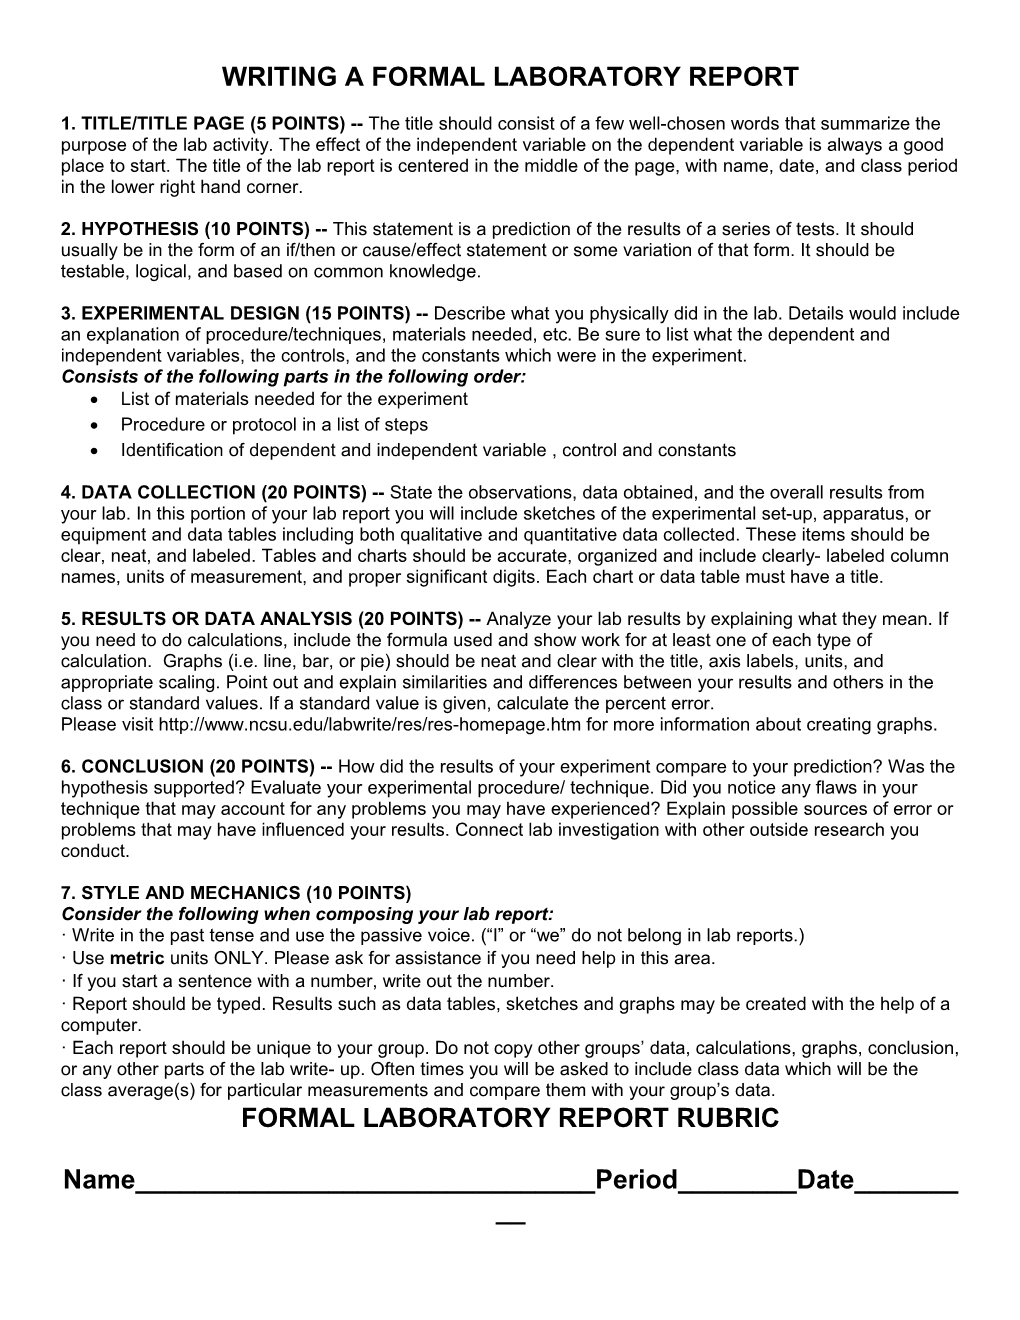 Writing a Formal Laboratory Report